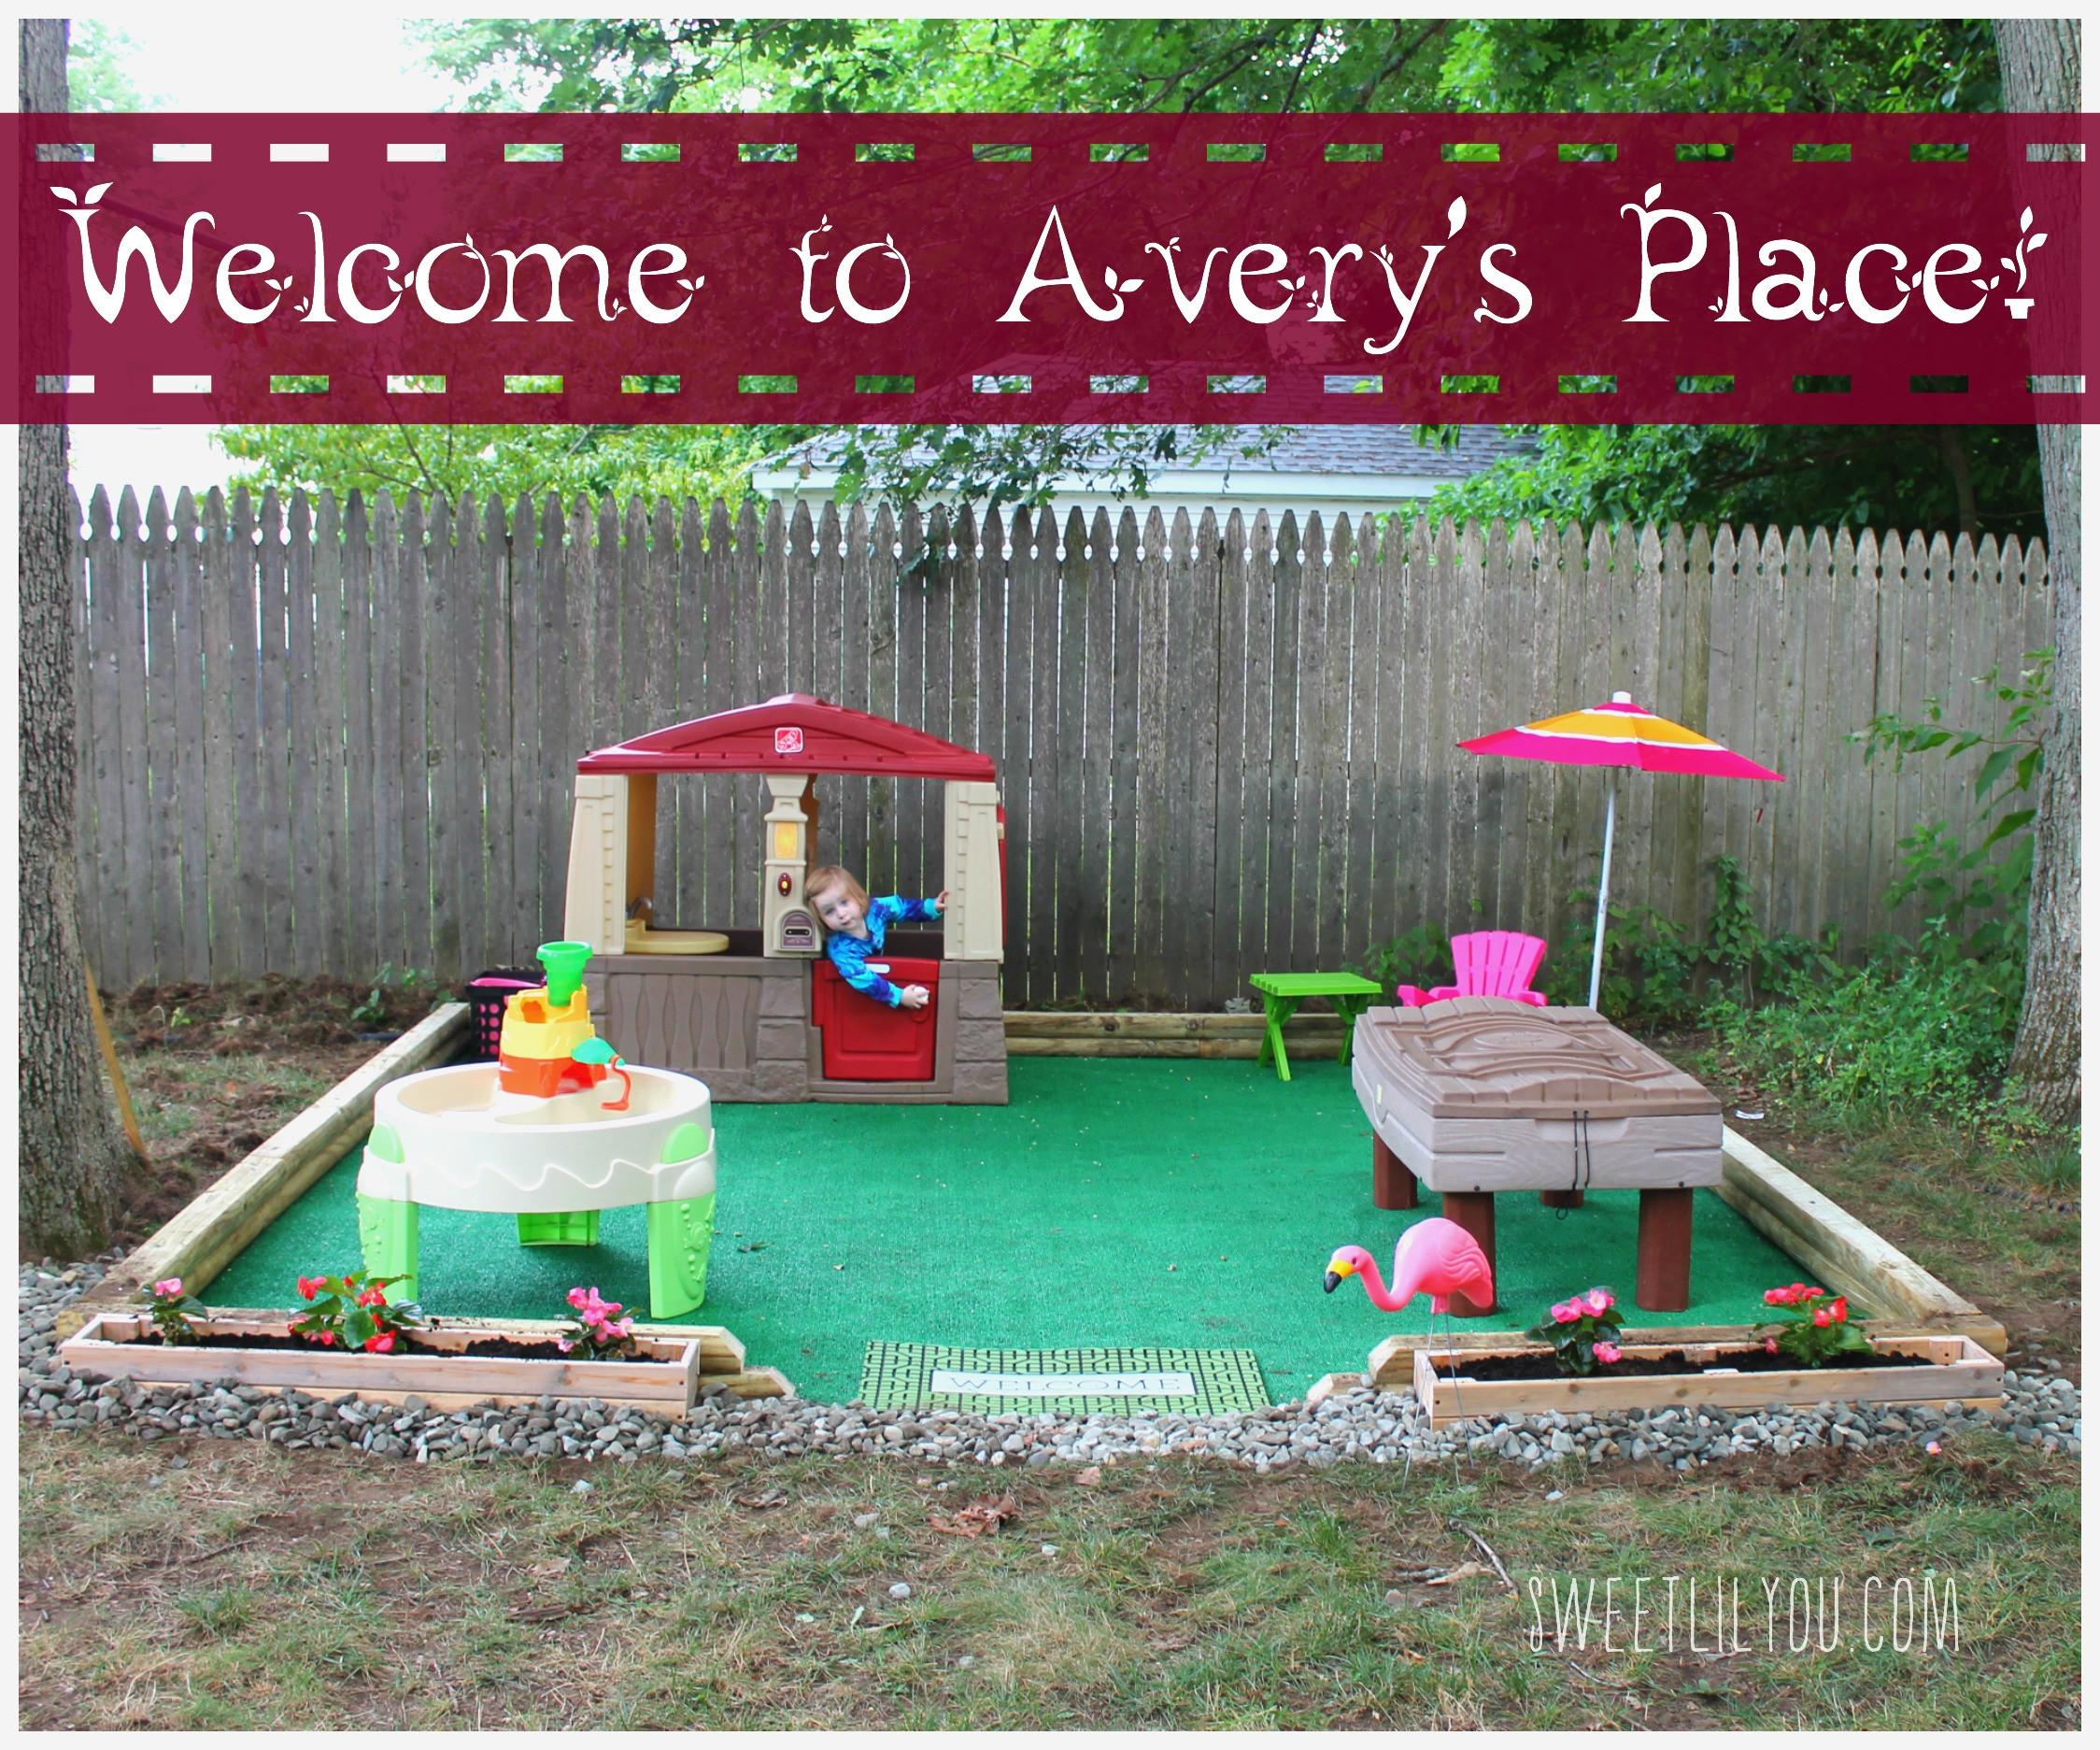 Kids Outdoor Play Area
 DIY Outdoor Play Space Avery s Place sweet lil you